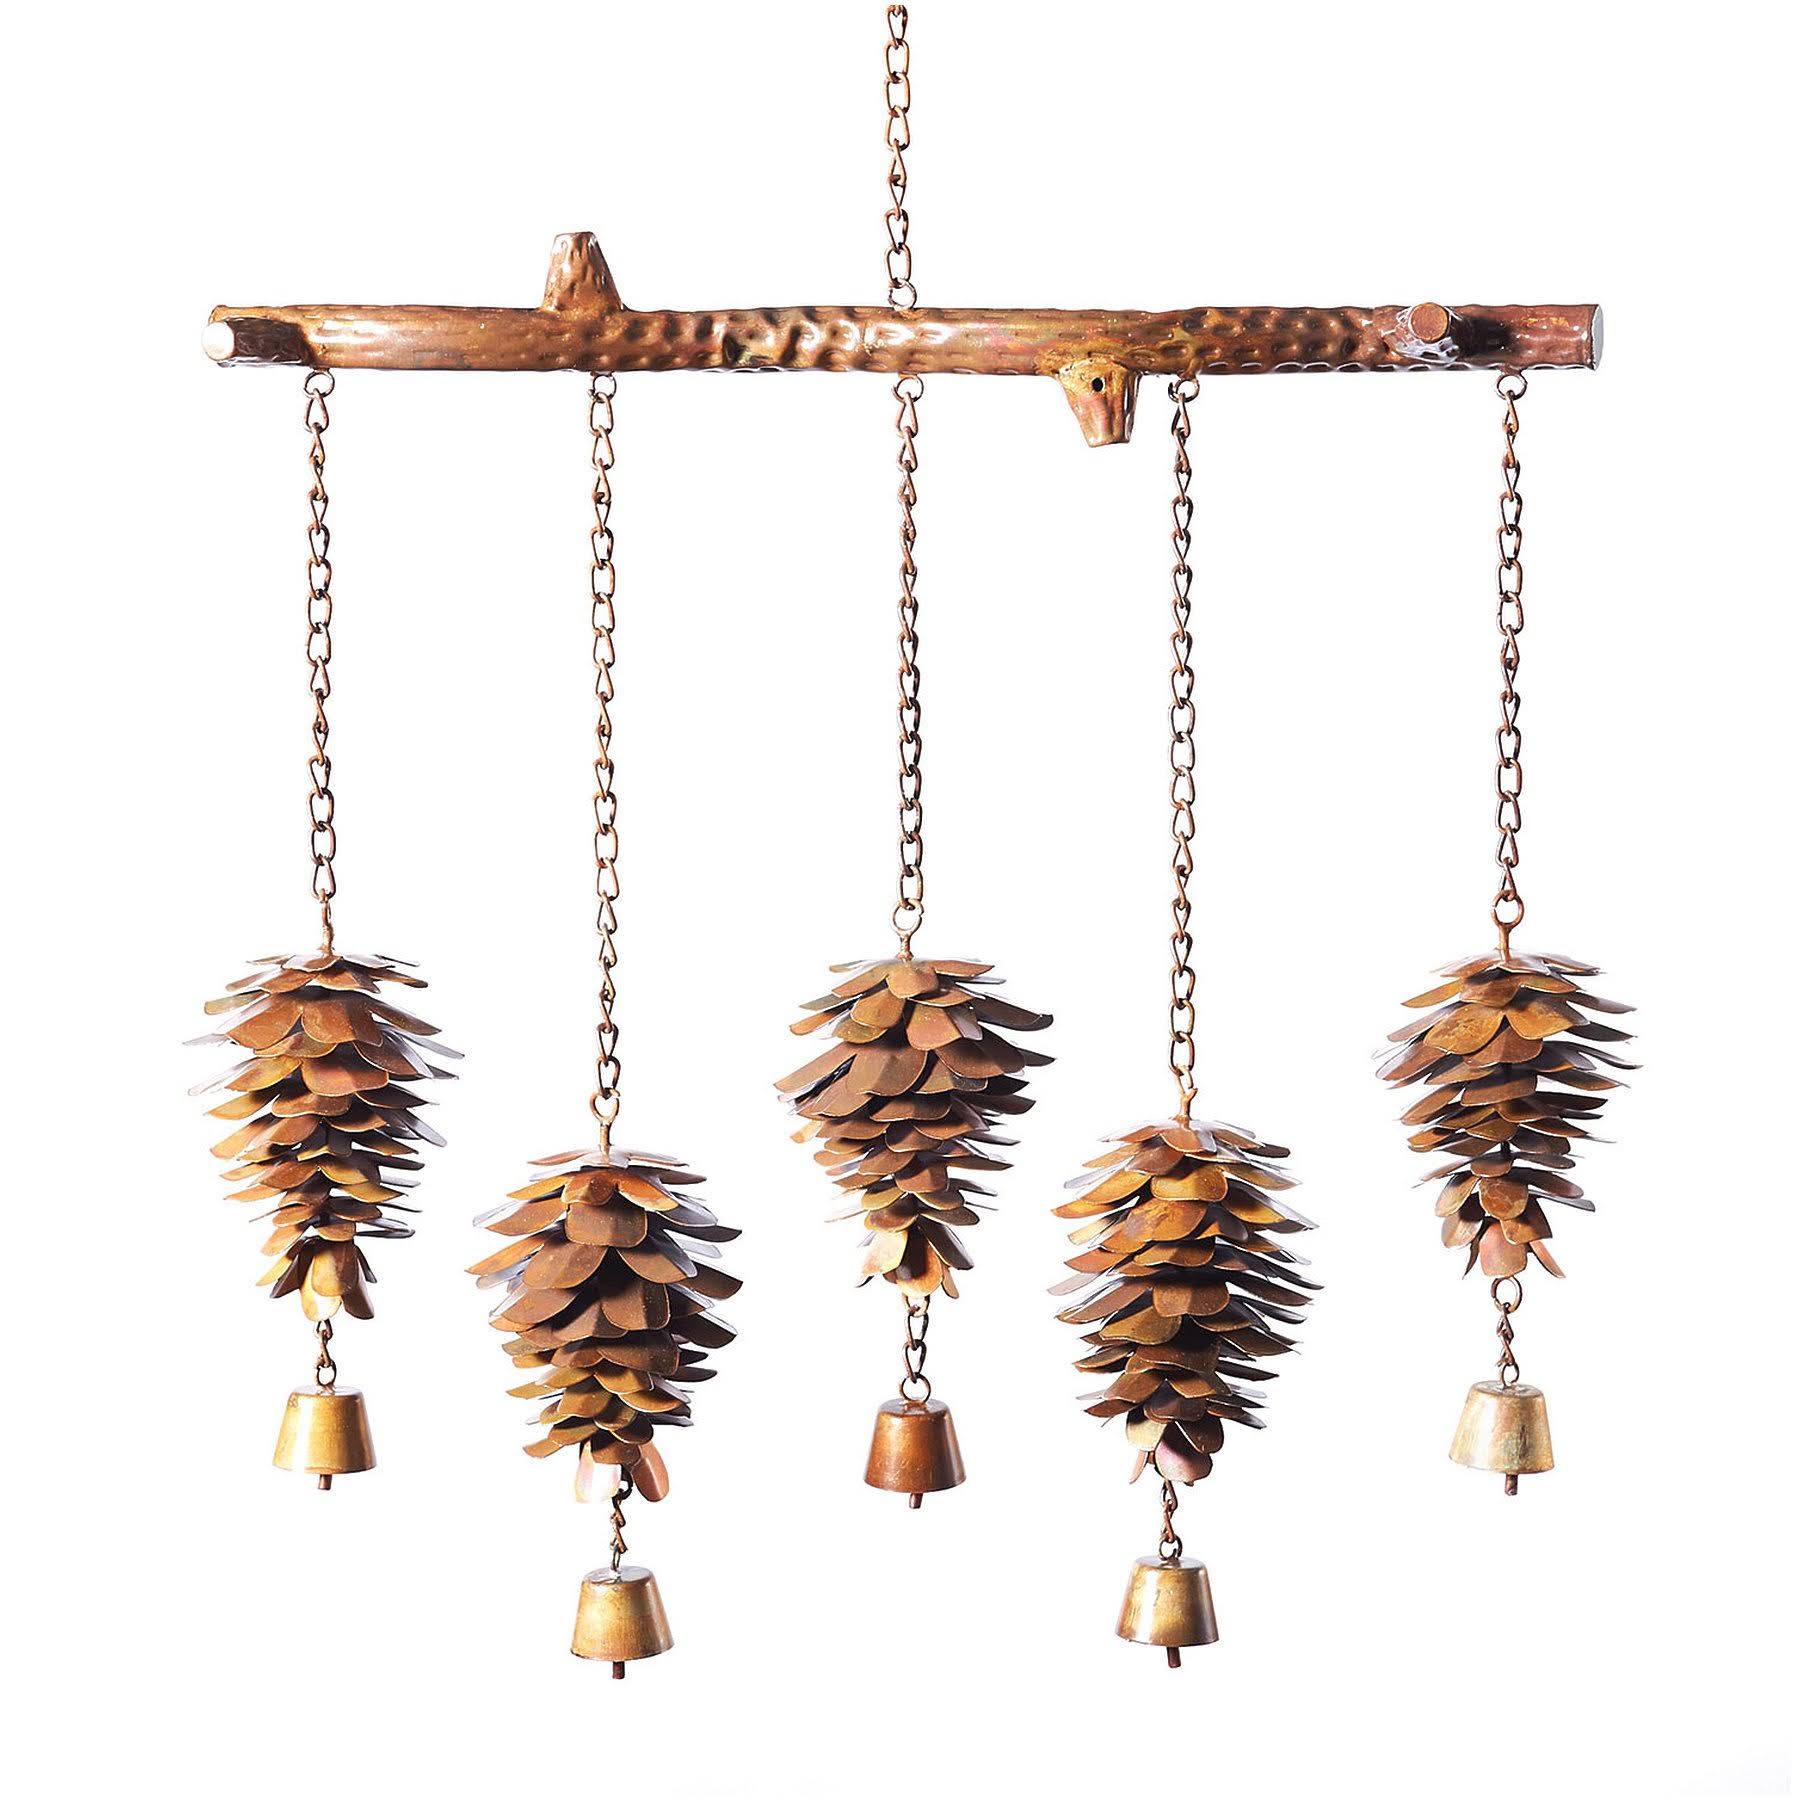 Ancient Graffiti ANCIENTAG1429 Pine Cone Flamed Wind Chime